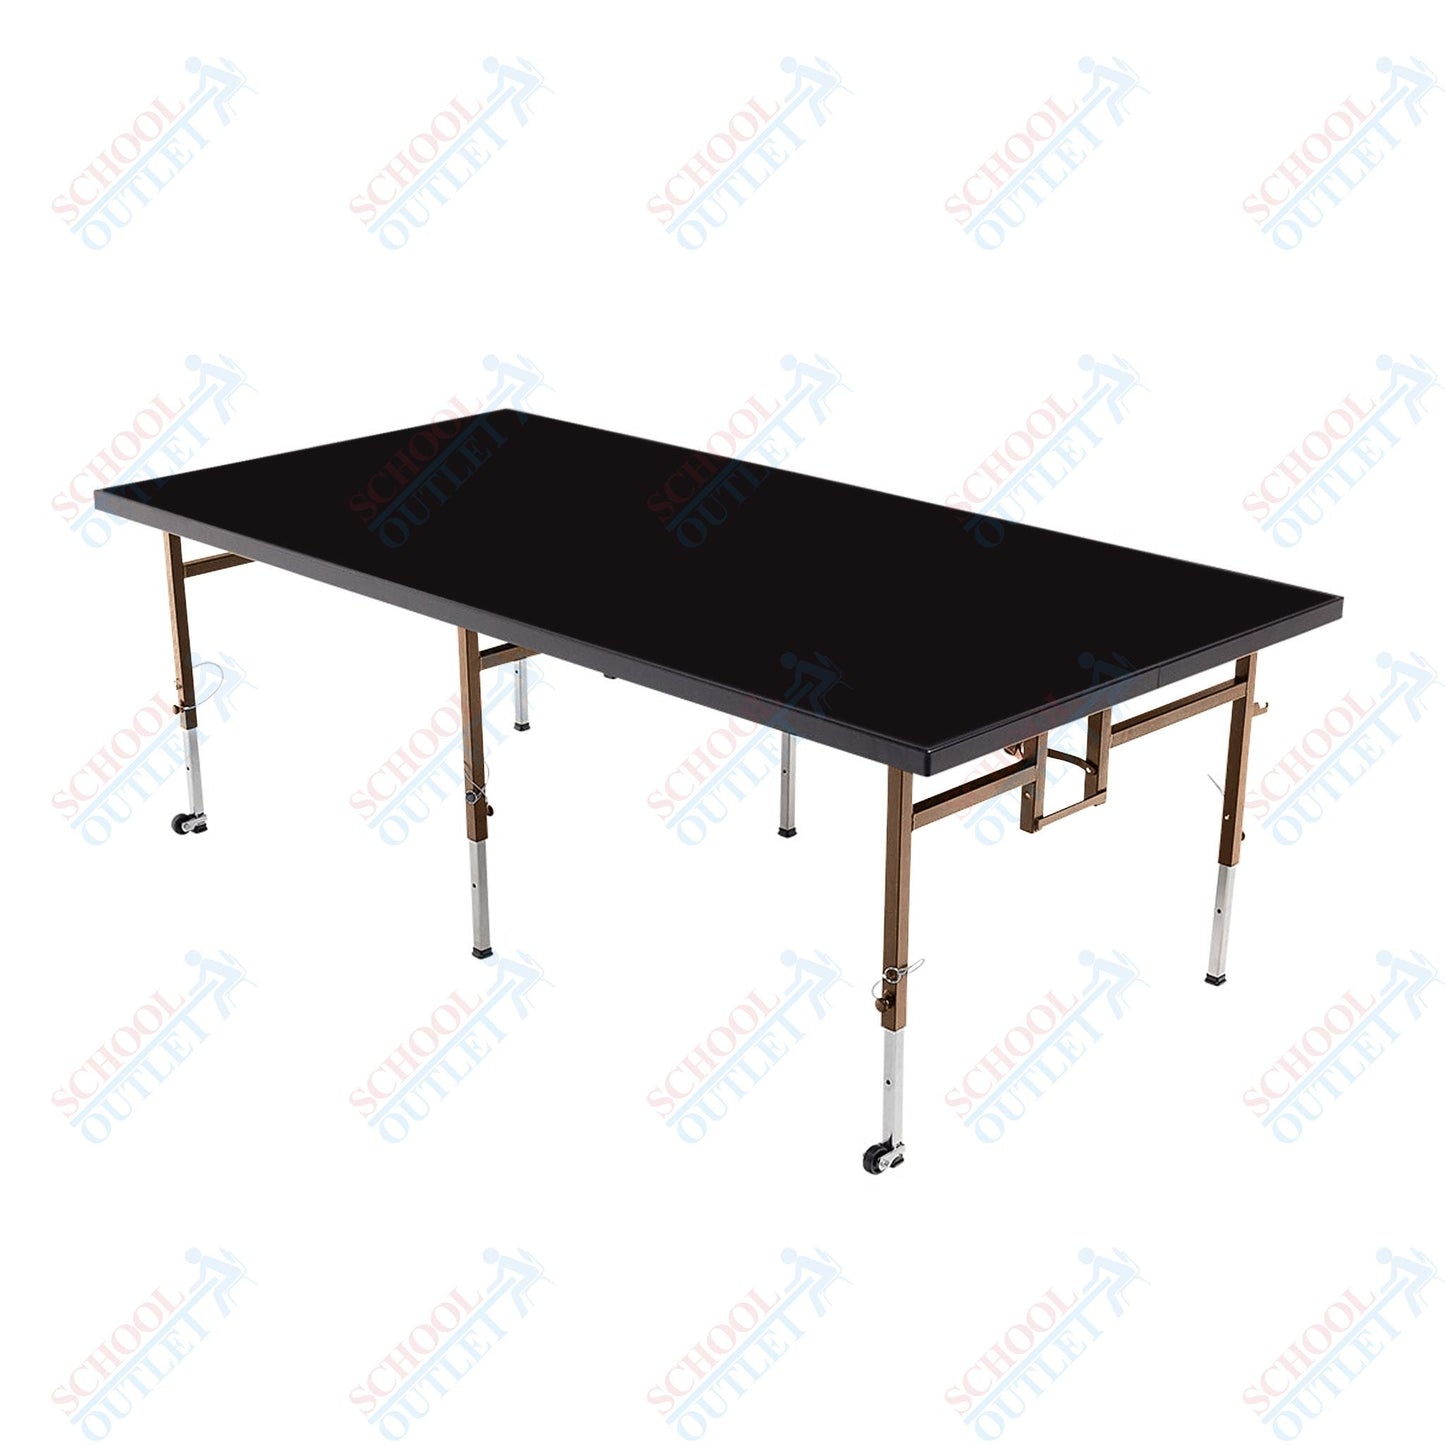 AmTab Adjustable Height Stage - Polypropylene Top - 48"W x 48"L x Adjustable 24" to 32"H (AmTab AMT-STA4424P) - SchoolOutlet